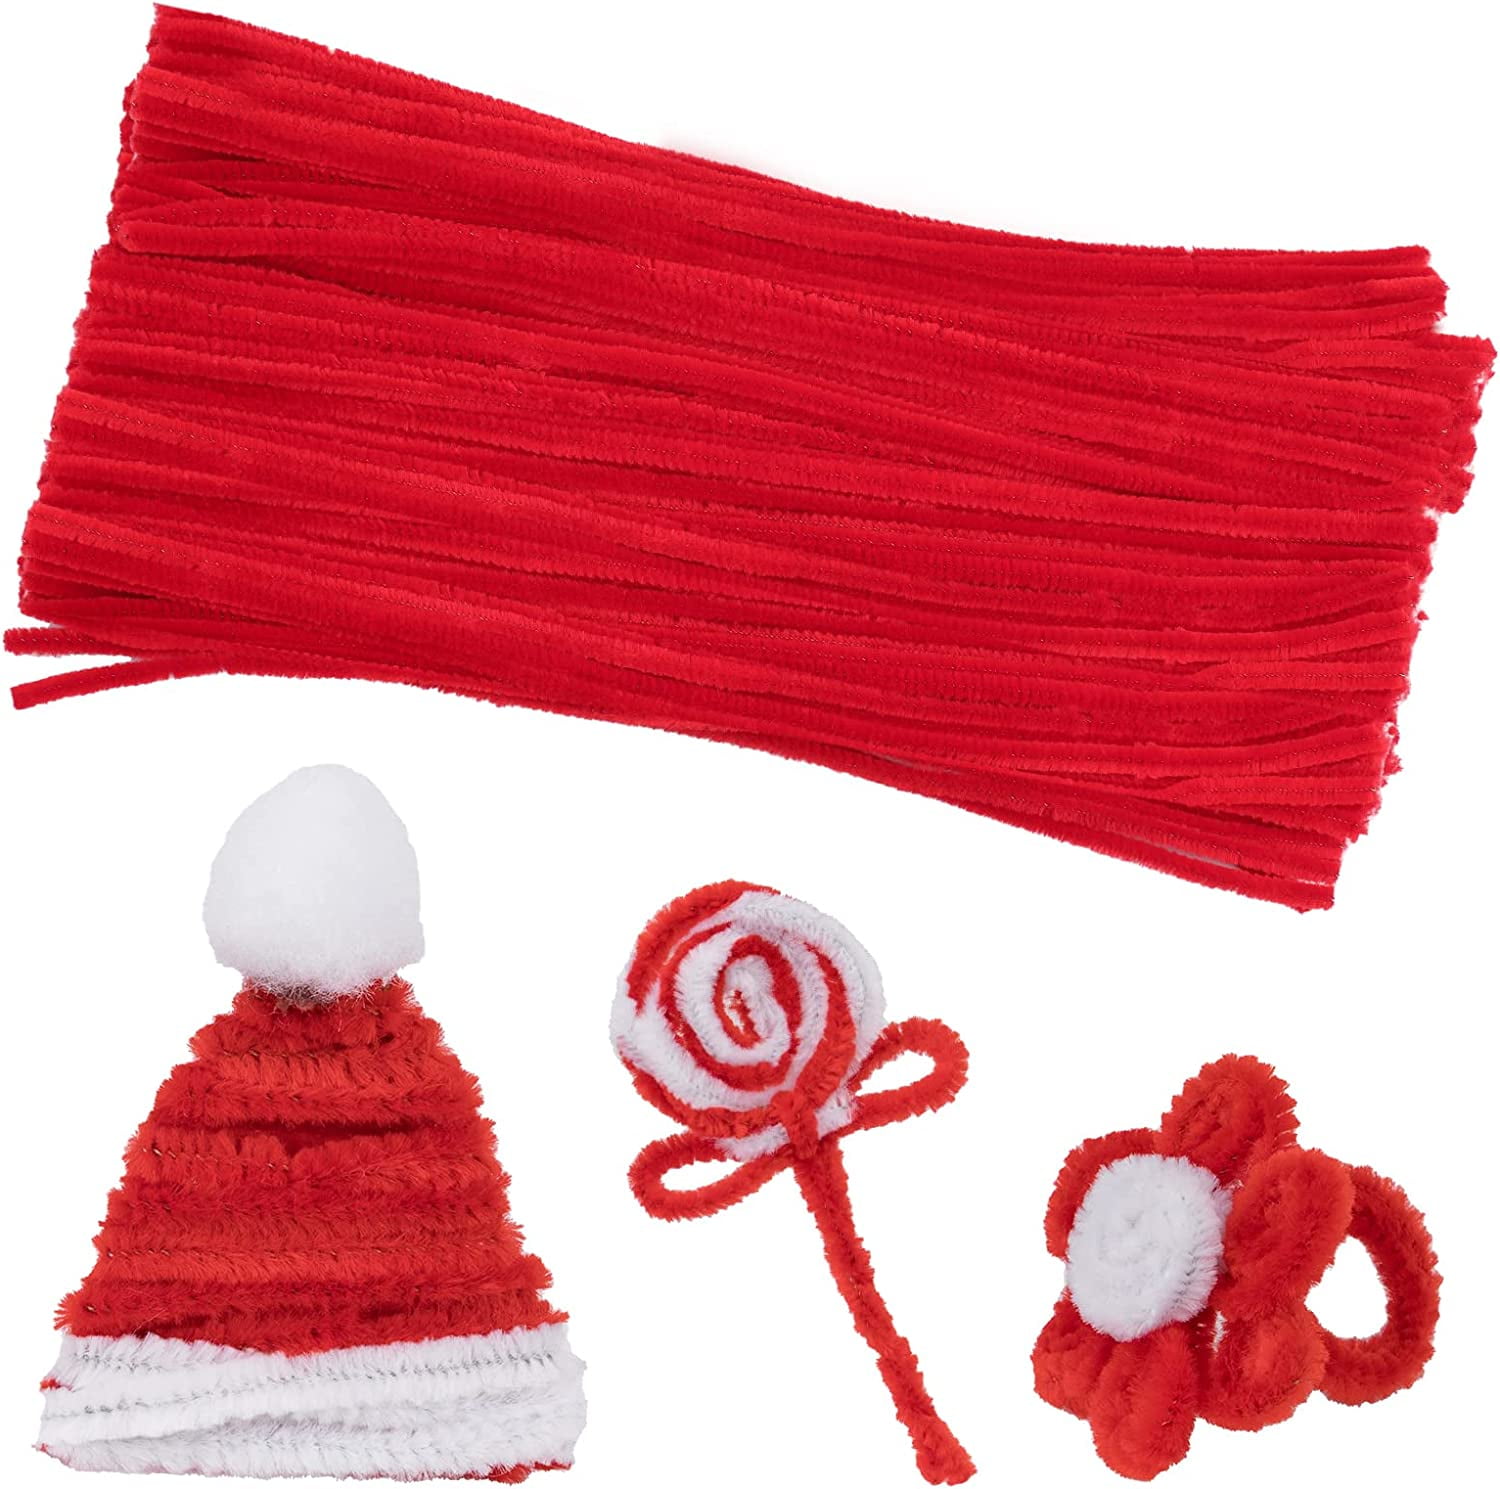 150 Pieces Red Pipe Cleaners Chenille Stem, Pipe Cleaners Chenille Stem,  Craft Pipe Cleaners, Art Pipe Cleaners, Pipe Cleaners Bulk for Creative  Home